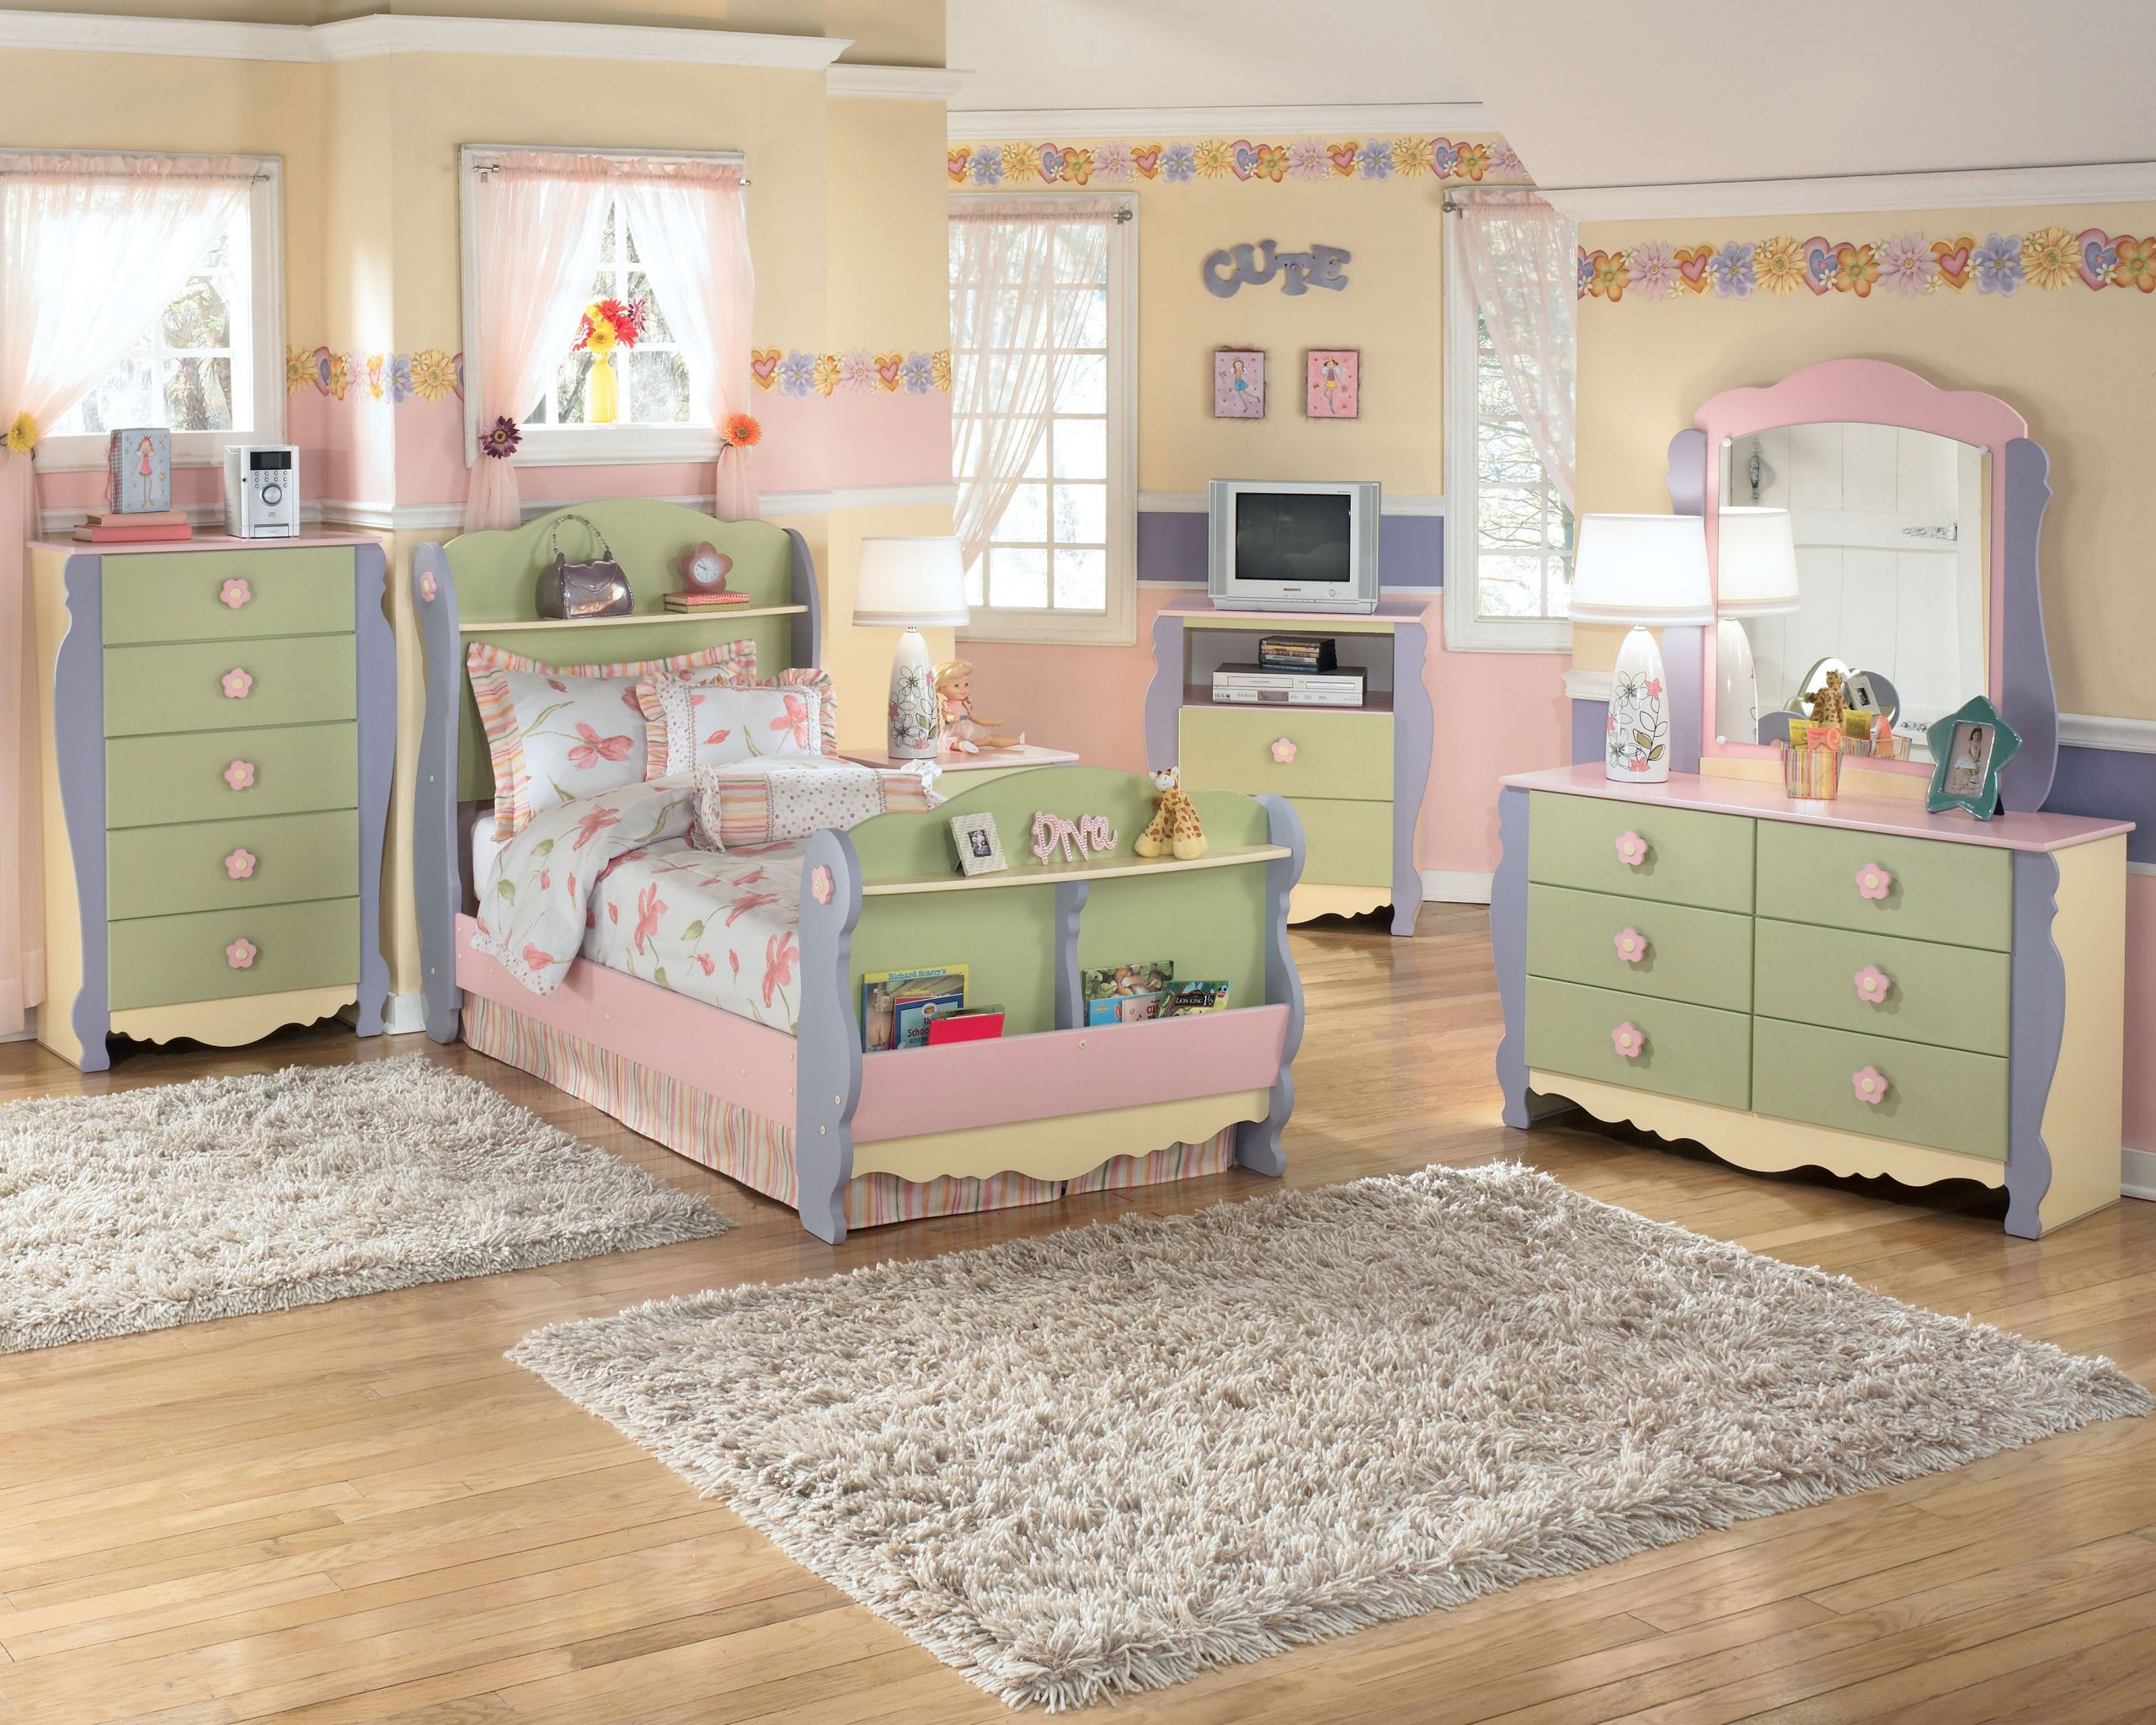 Girl Bedroom Furniture
 Such a sweet Ashley Furniture HomeStore bedroom for a